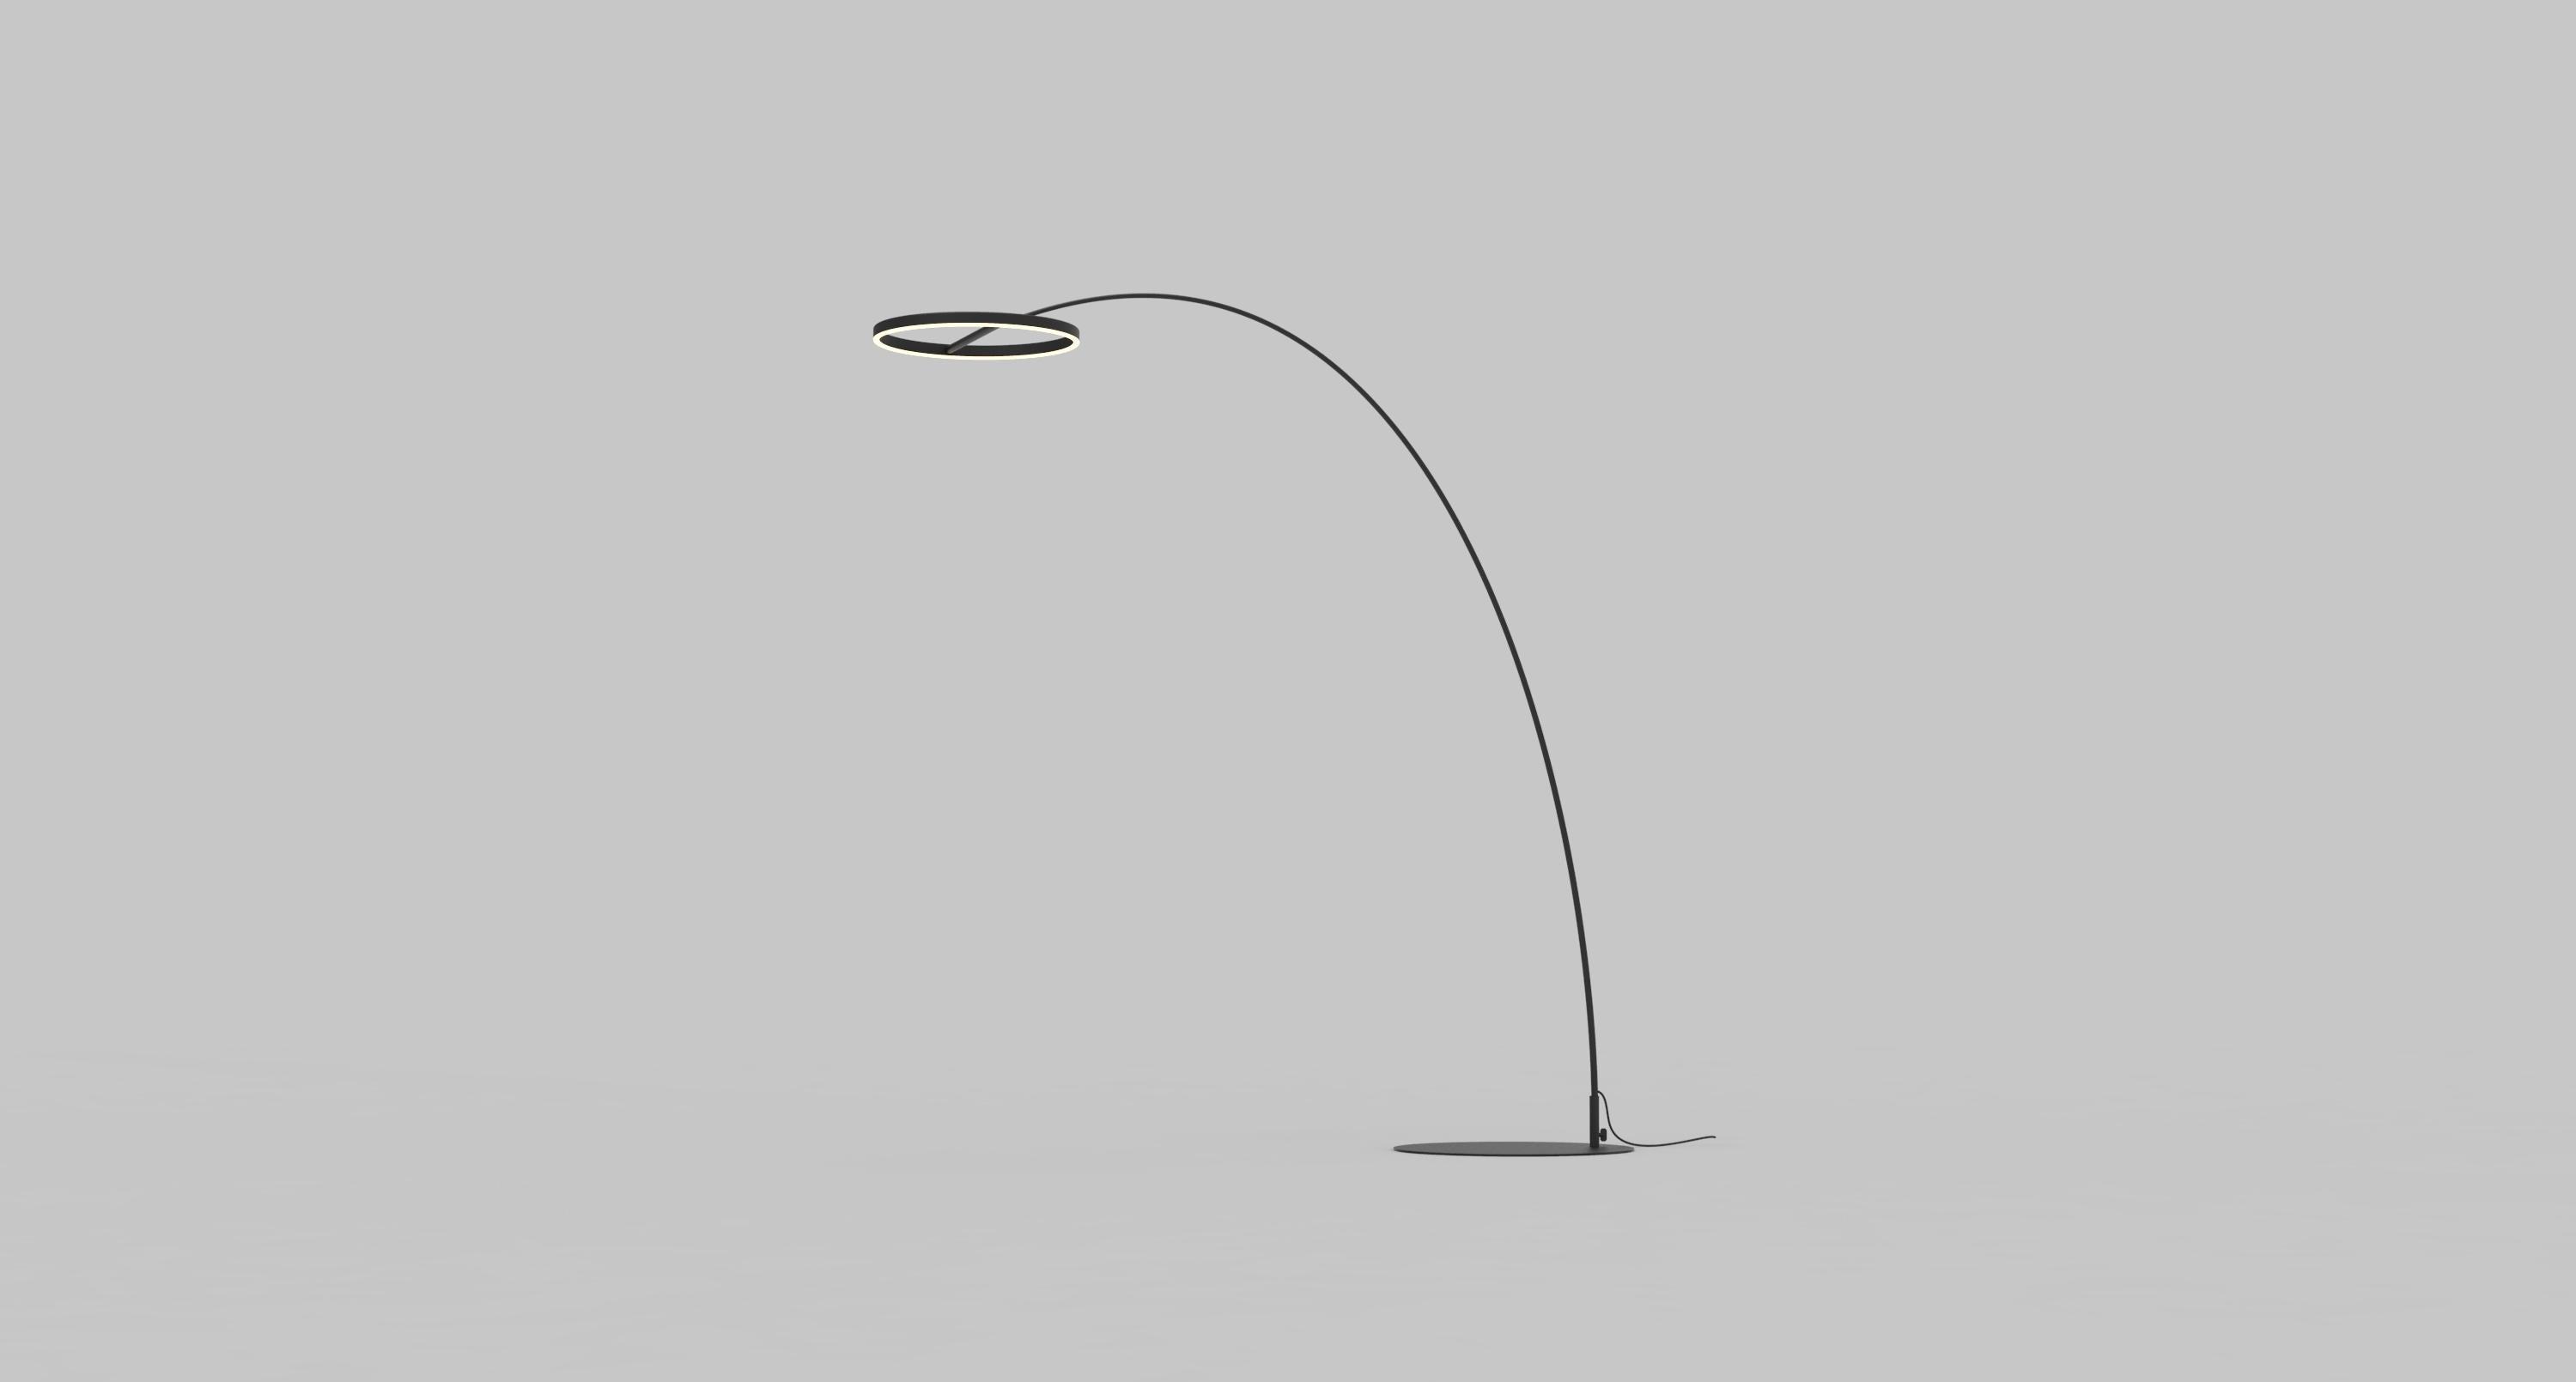 SOL collection is low-key design with elaborate consideration, consists of pendant, table lamp, floor lamp and wall sconce. The SOL creates a halo like effect thru its adjustable ring shape lamp shade that highly adjustable. The SOL floor lamp is